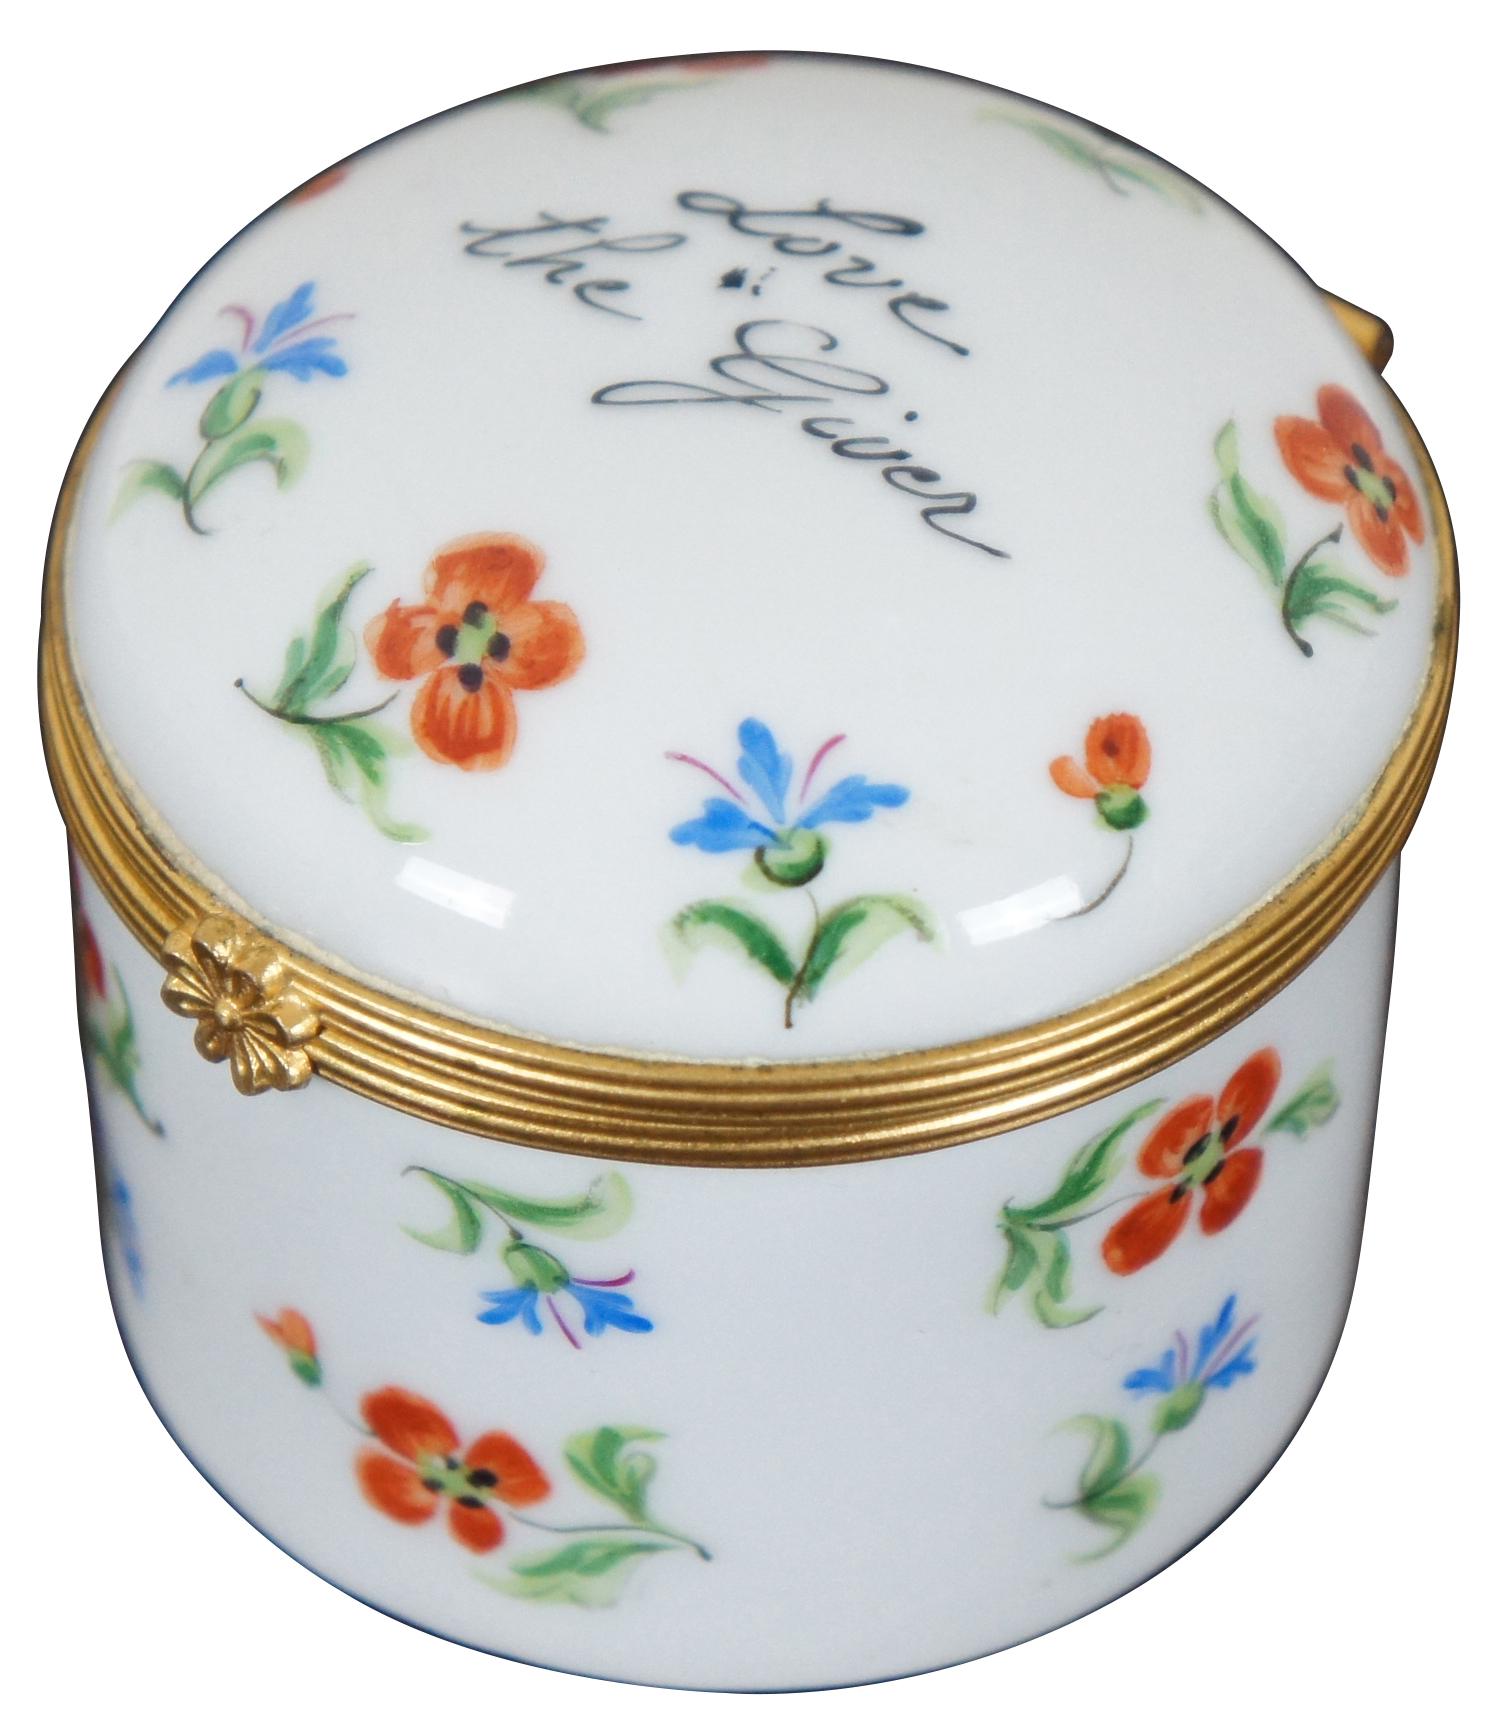 Vintage Tiffany & Company Private Stock hand painted round Limoges trinket or pill box, numbered 306; white porcelain with red-orange poppies, bluebells, and the phrase “Love the Giver.”
 